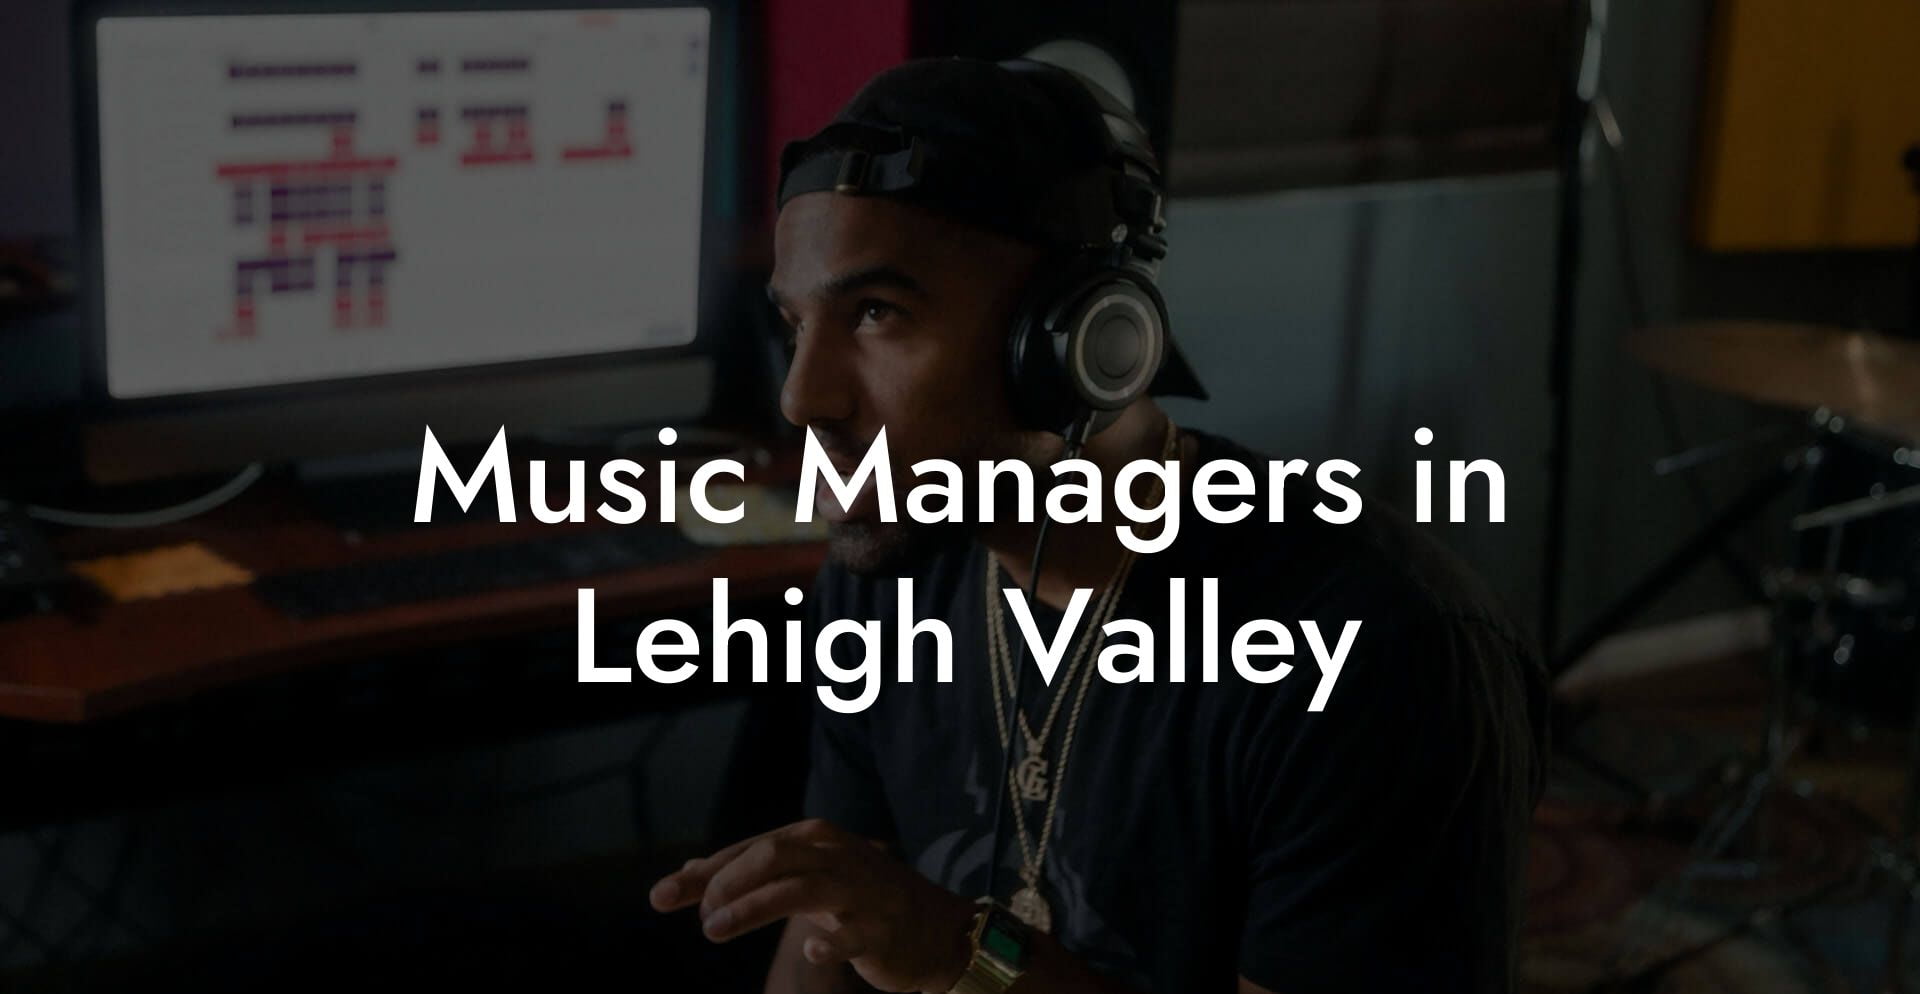 Music Managers in Lehigh Valley